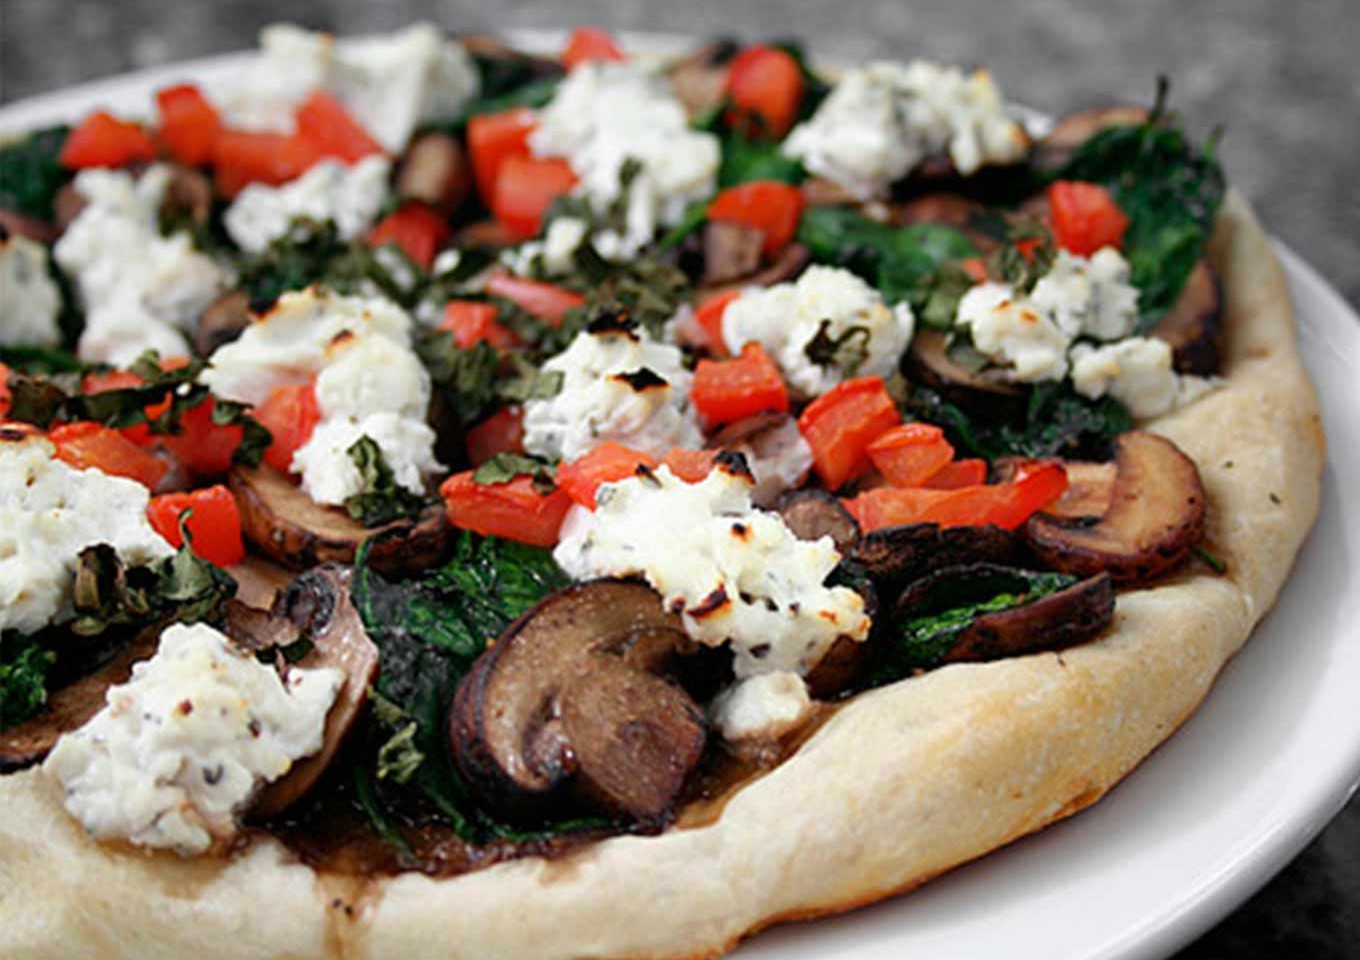 Goat Cheese Pizza with Spinach, Mushroom and Tomatoes